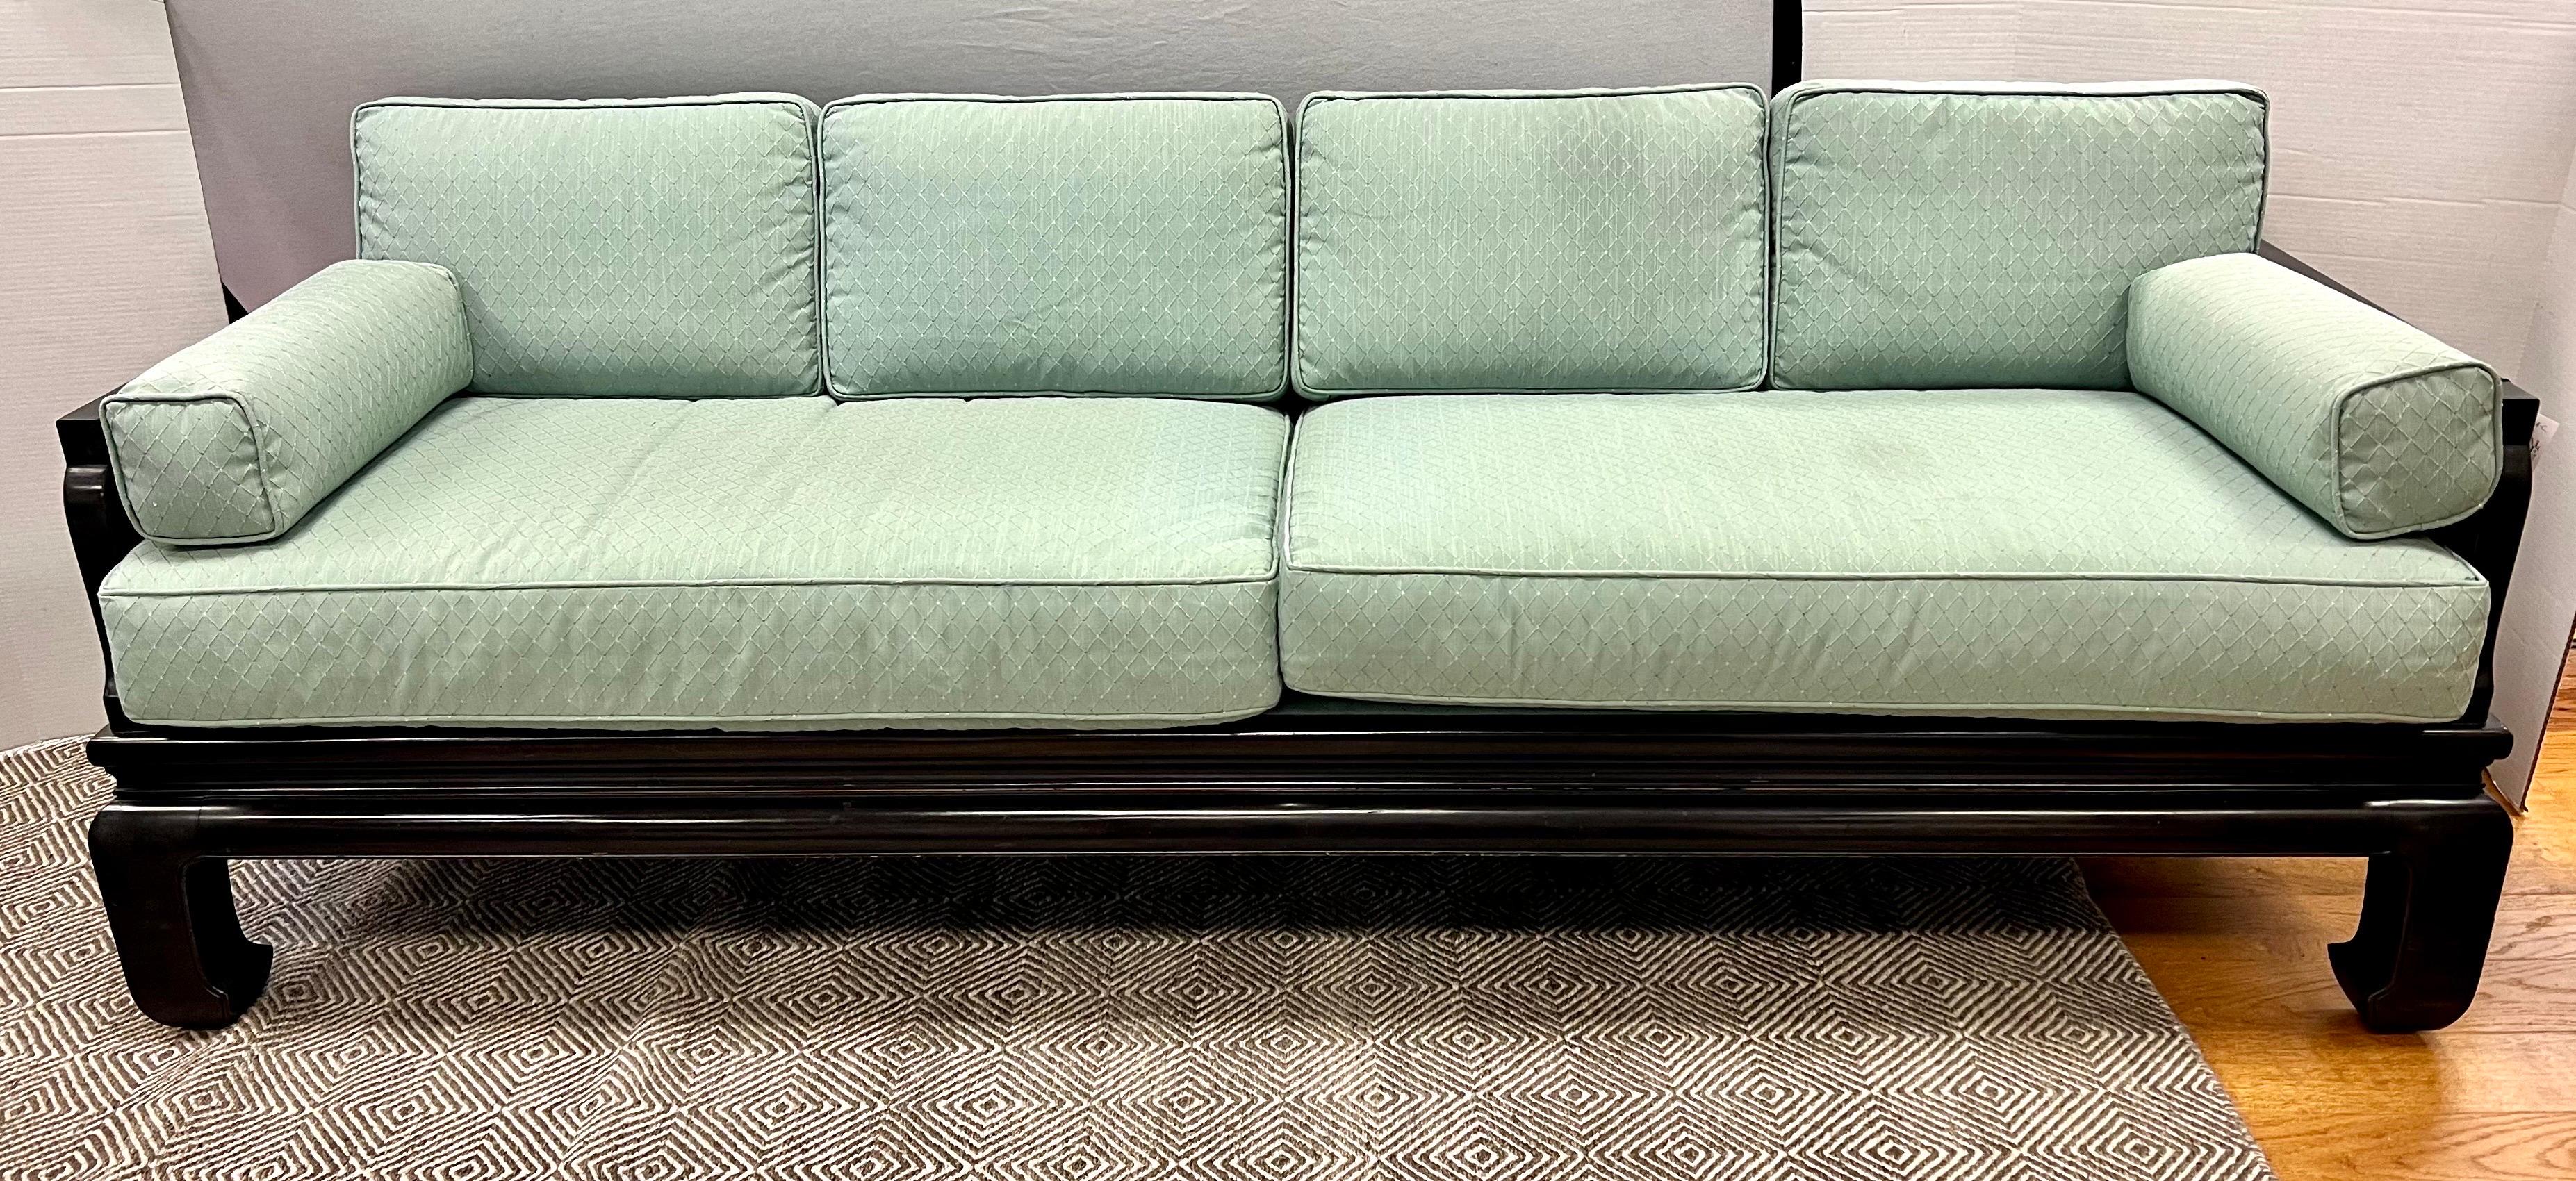 Elegant James Mont style chinoiserie sofa and matching loveseat set with ebonized black frames that are pierced, James Mont Style, throughout - see pics. They come with fitted blue-green upholstered cushions, each with flat crest and fretwork type